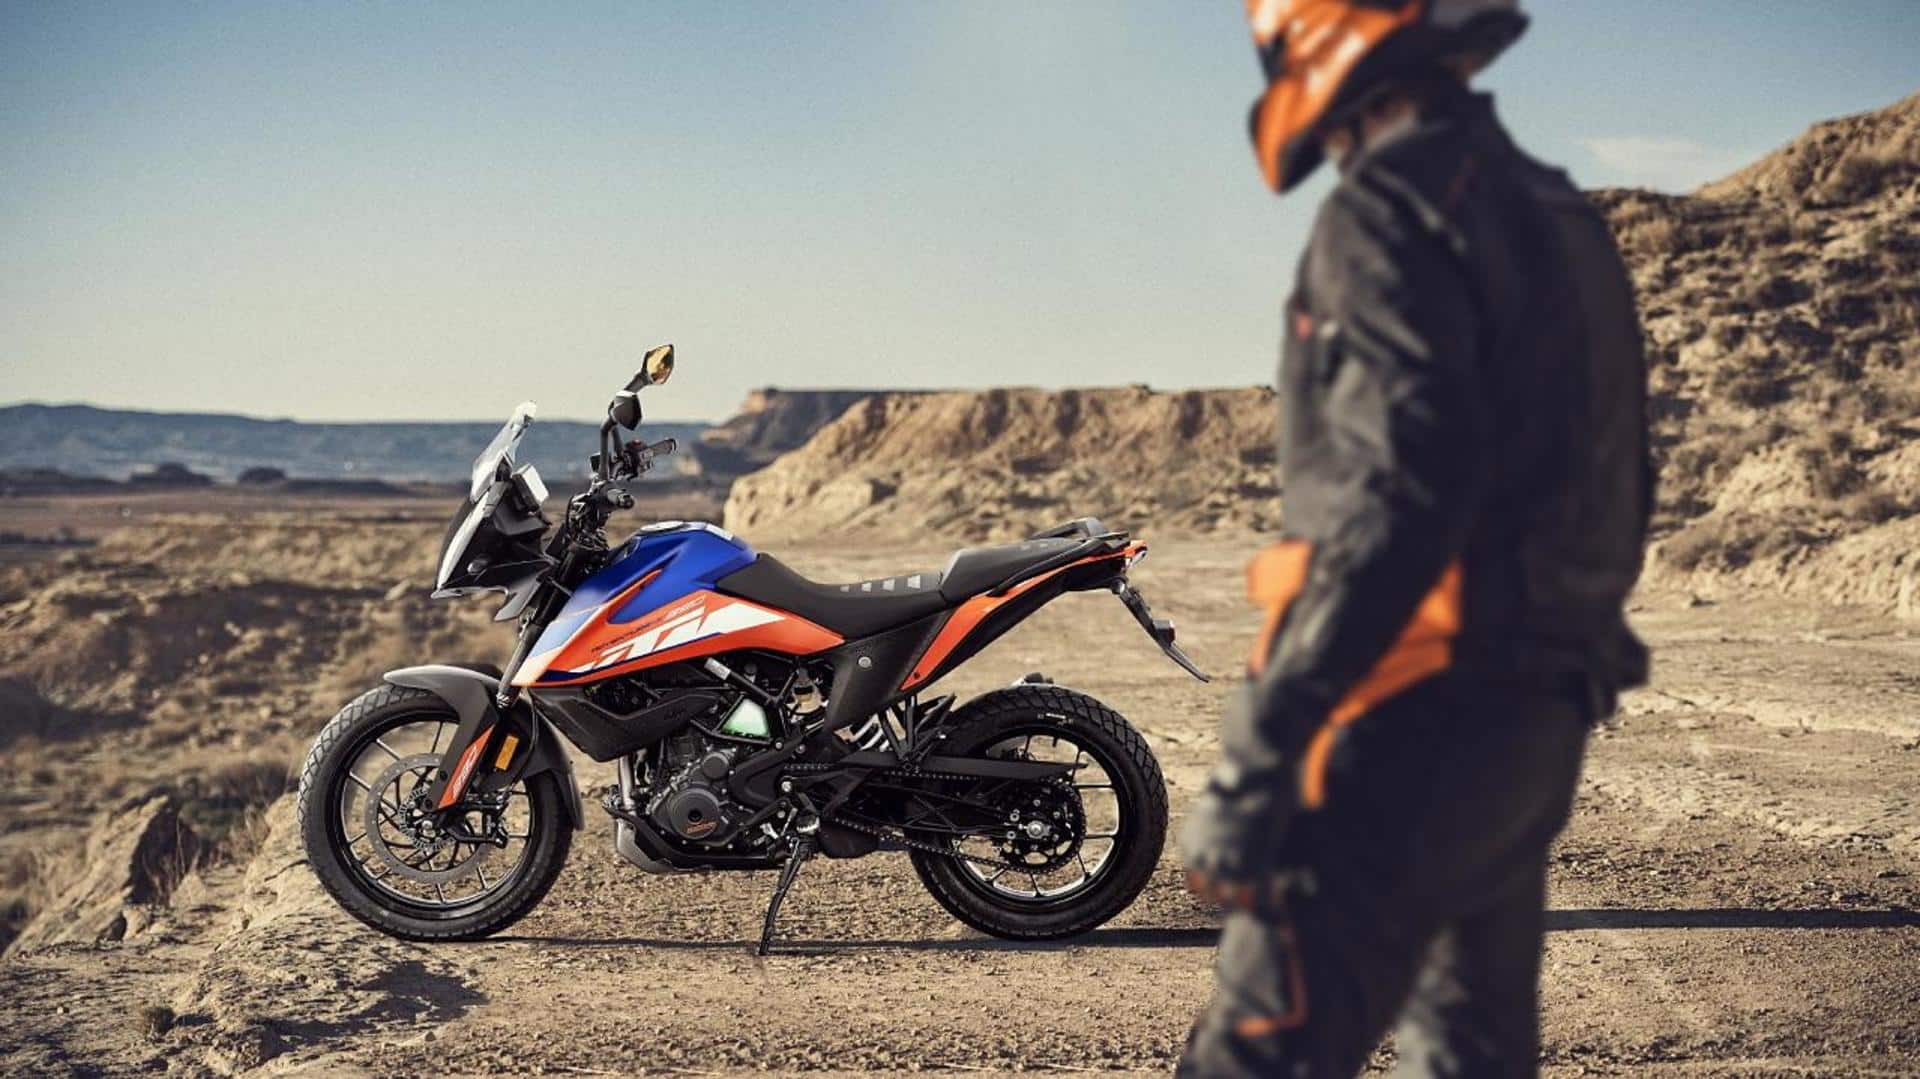 KTM 390 Adventure V launched at Rs. 3.39 lakh